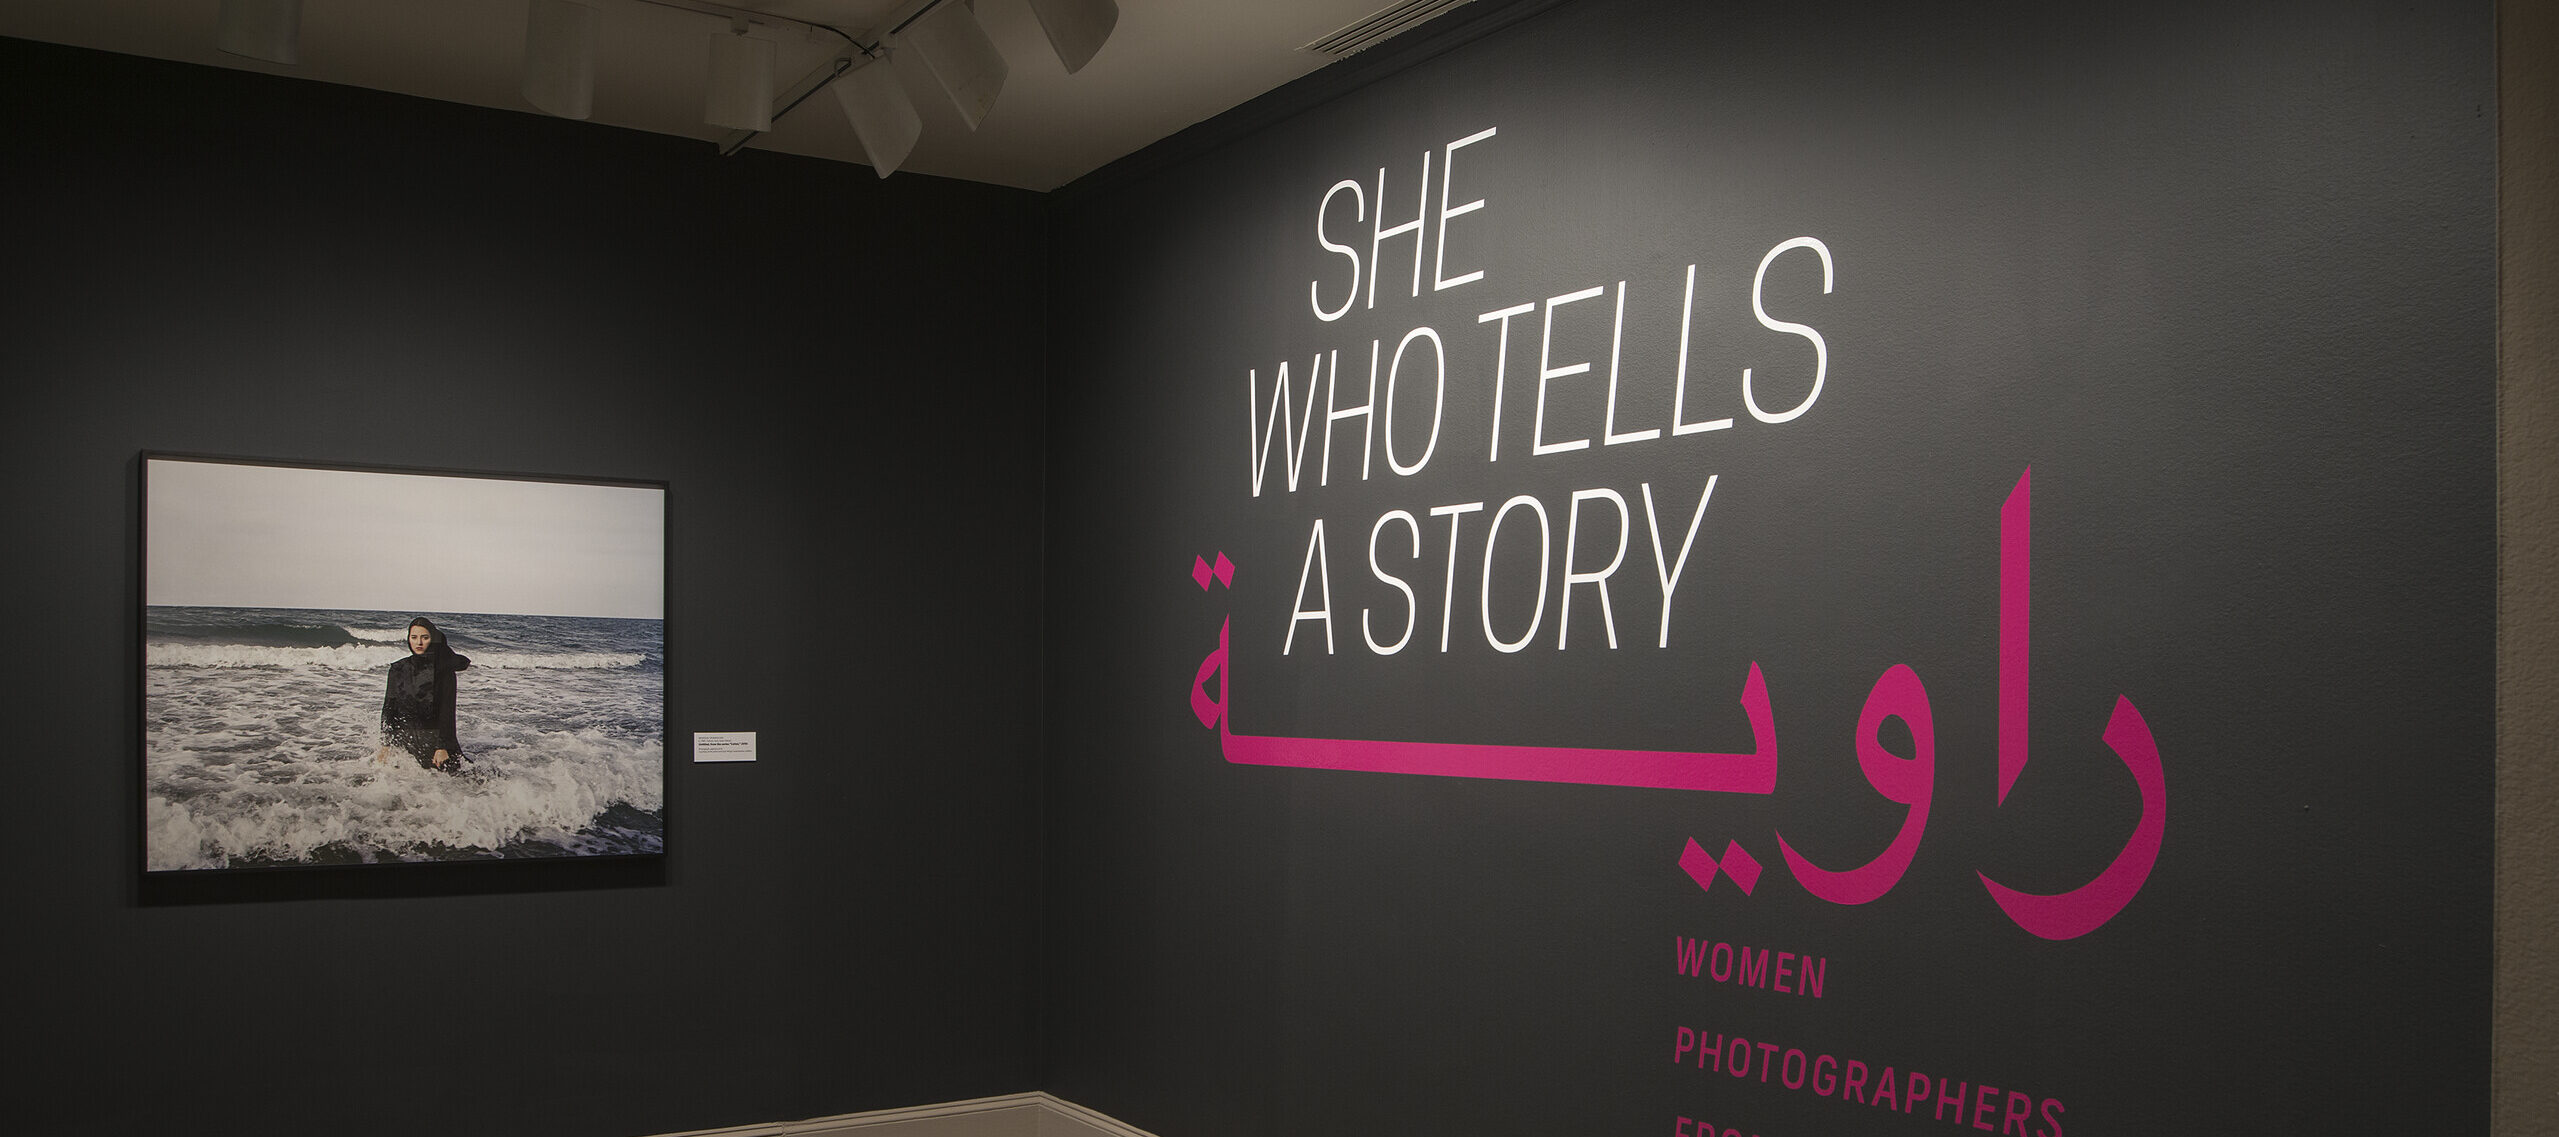 A gallery view of a black wall with a large photograph of a woman. The woman is wearing a long black dress and a head scarf. She is standing in the ocean, surrounded by waves. On the right wall is a text that says 